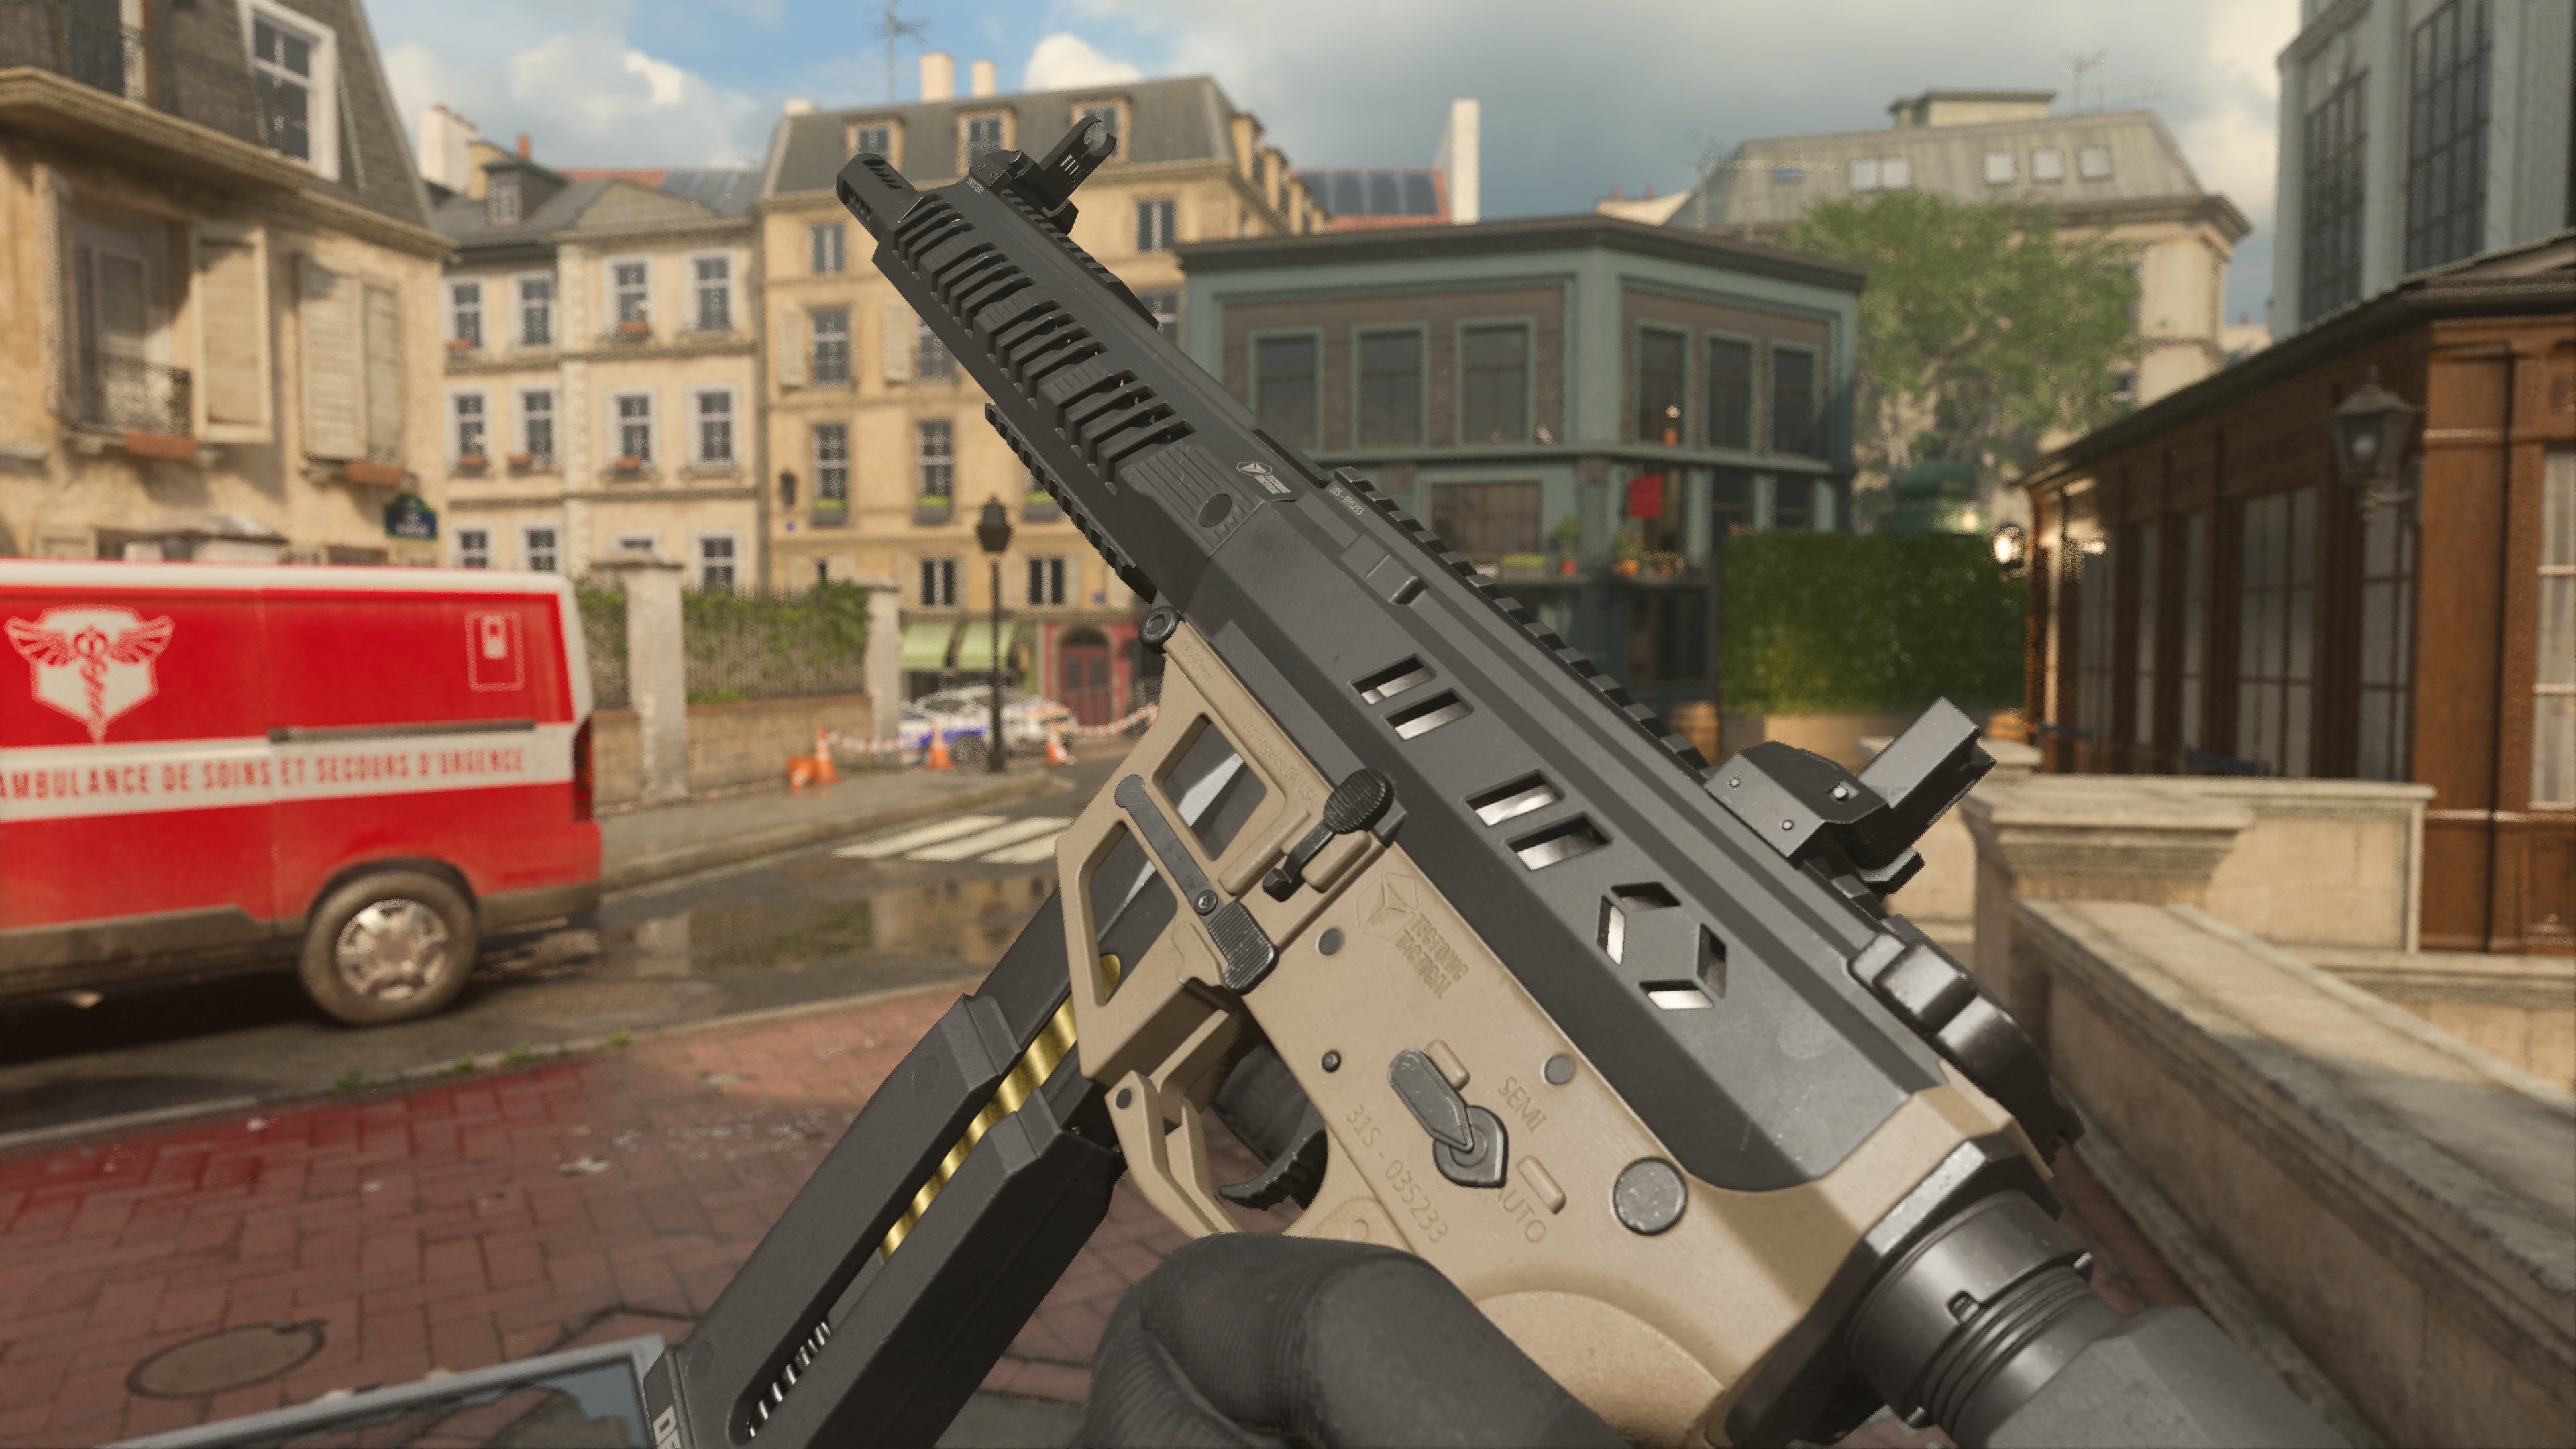 Superi 46 SMG in MW3 and Warzone